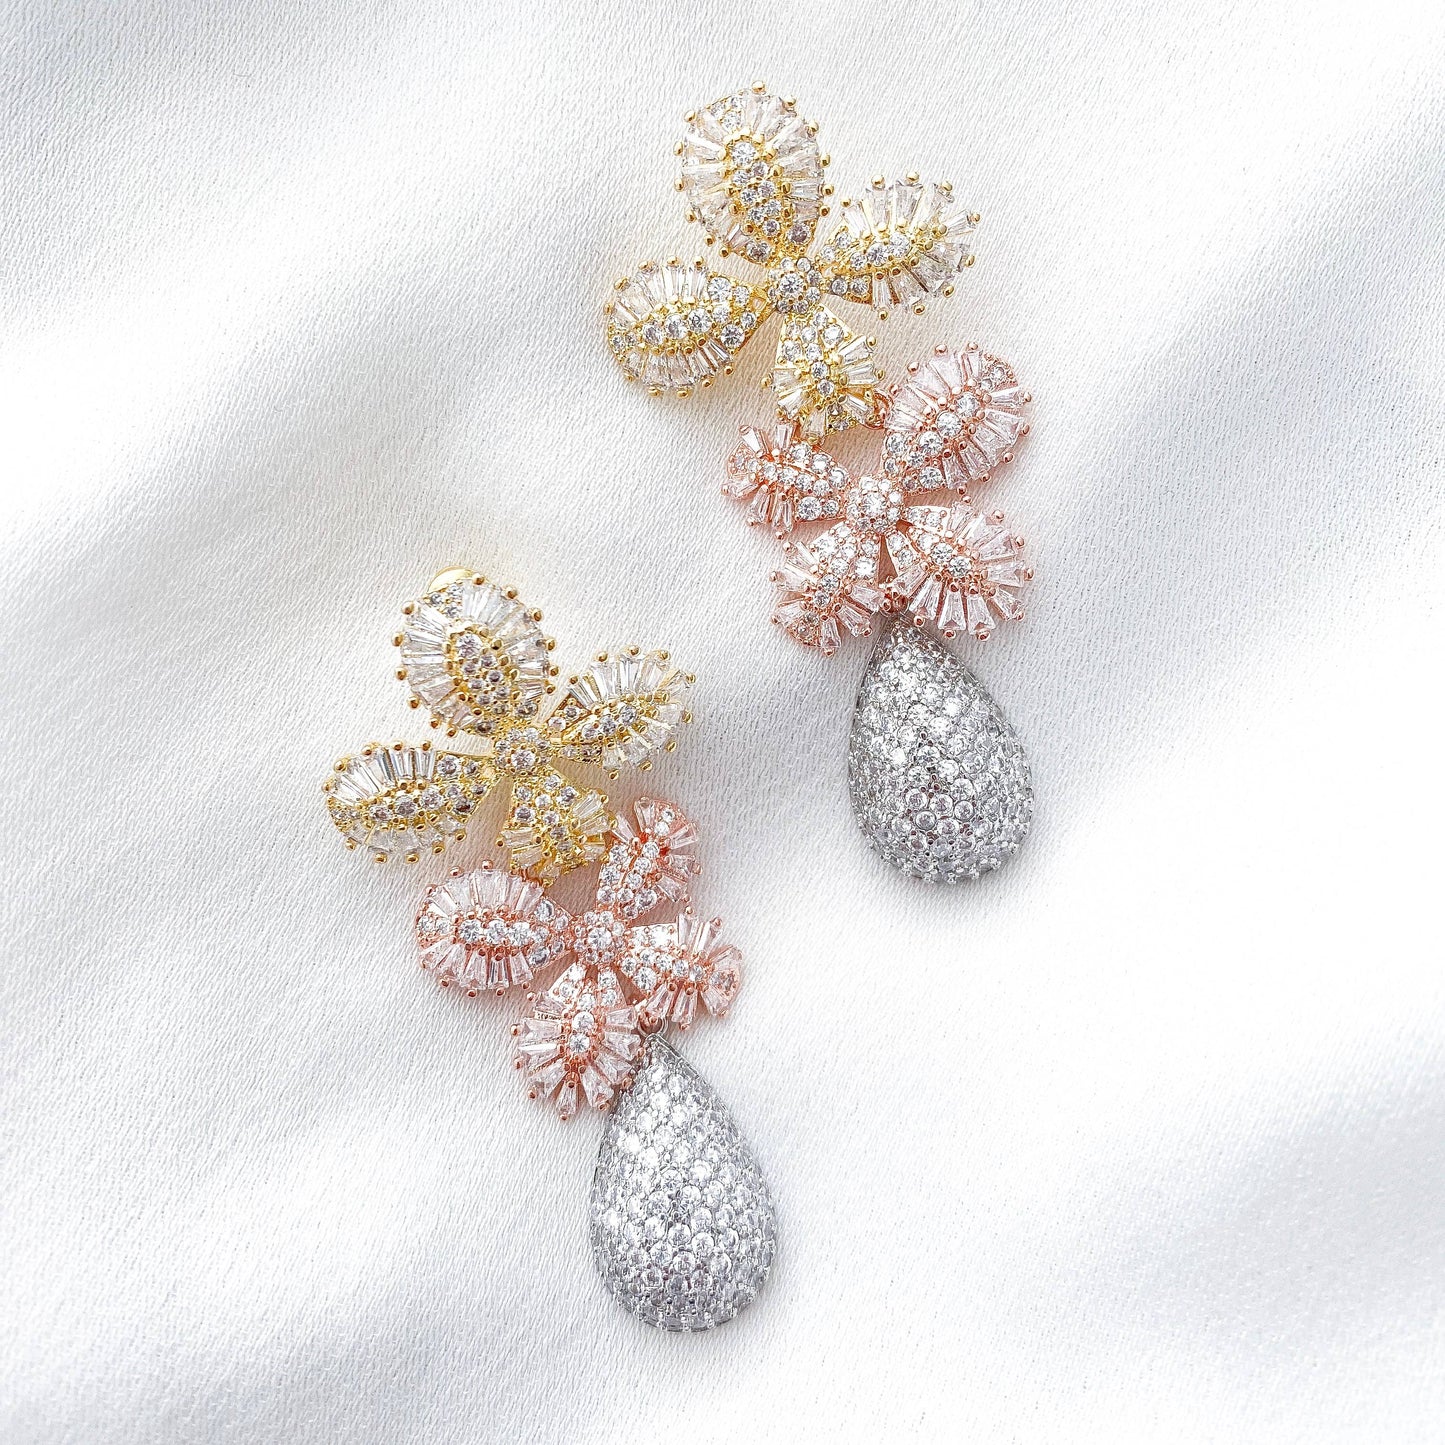 Gold, Rose Gold and Silver Crystal Flower earrings